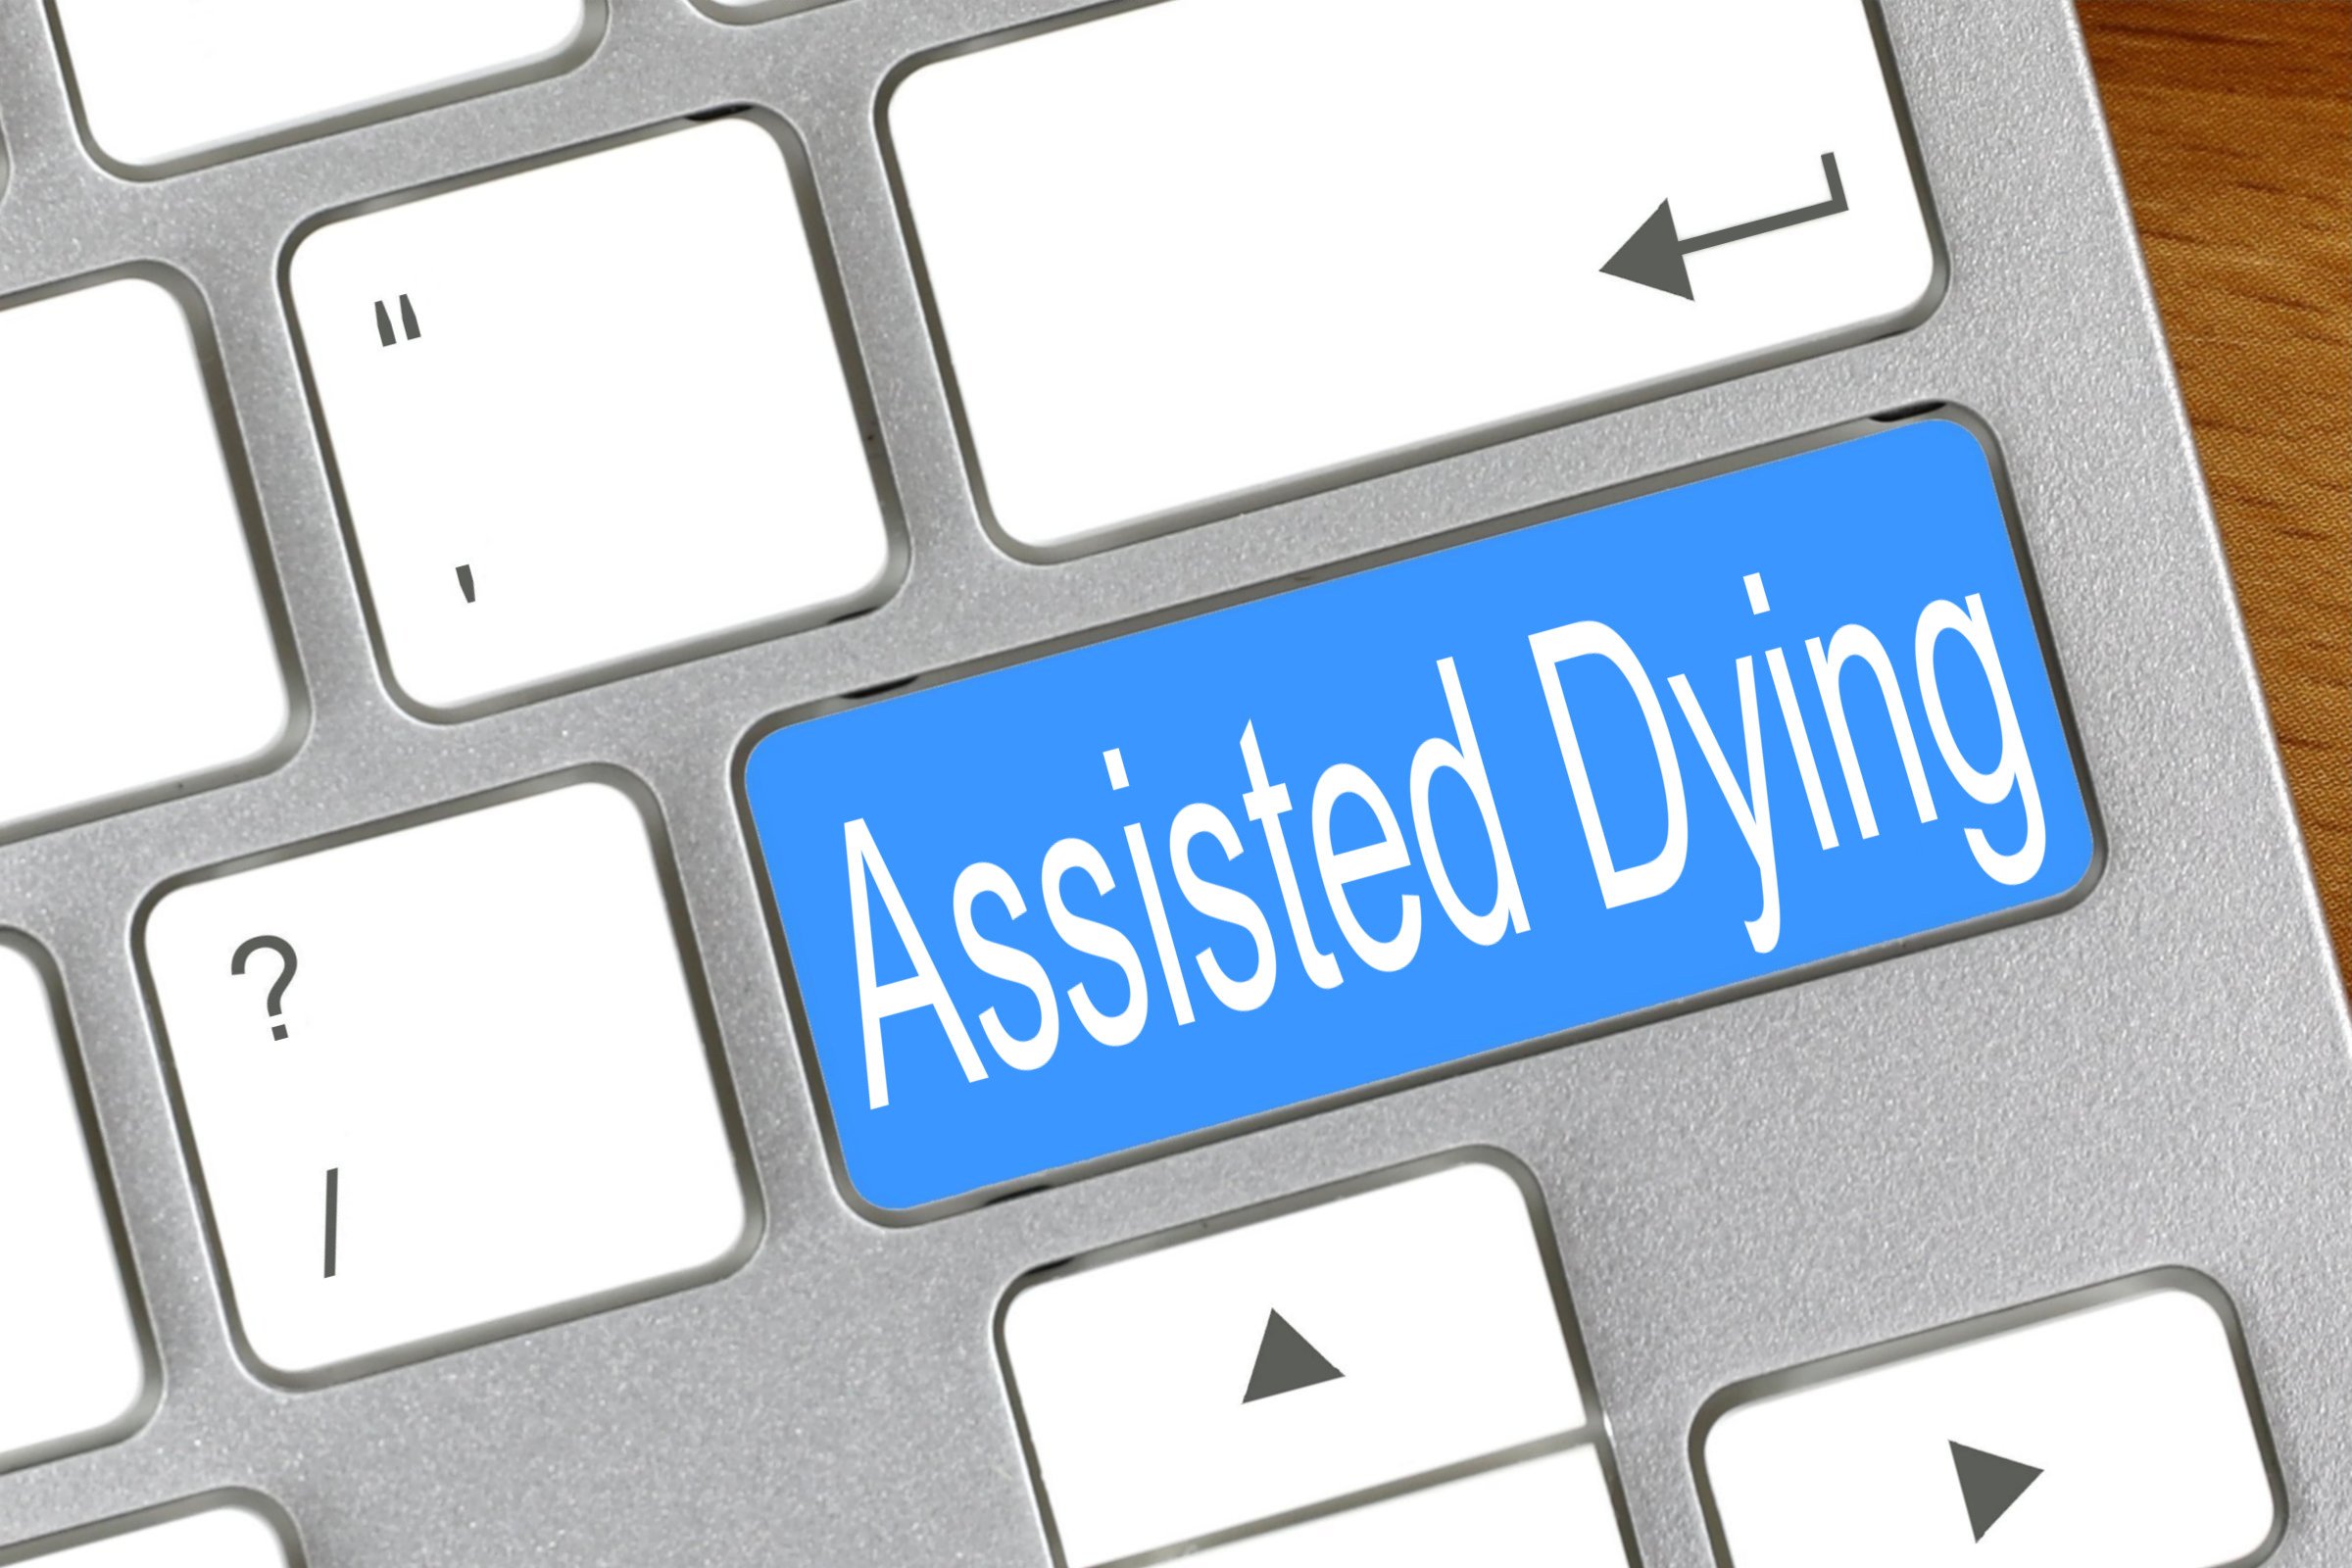 assisted dying